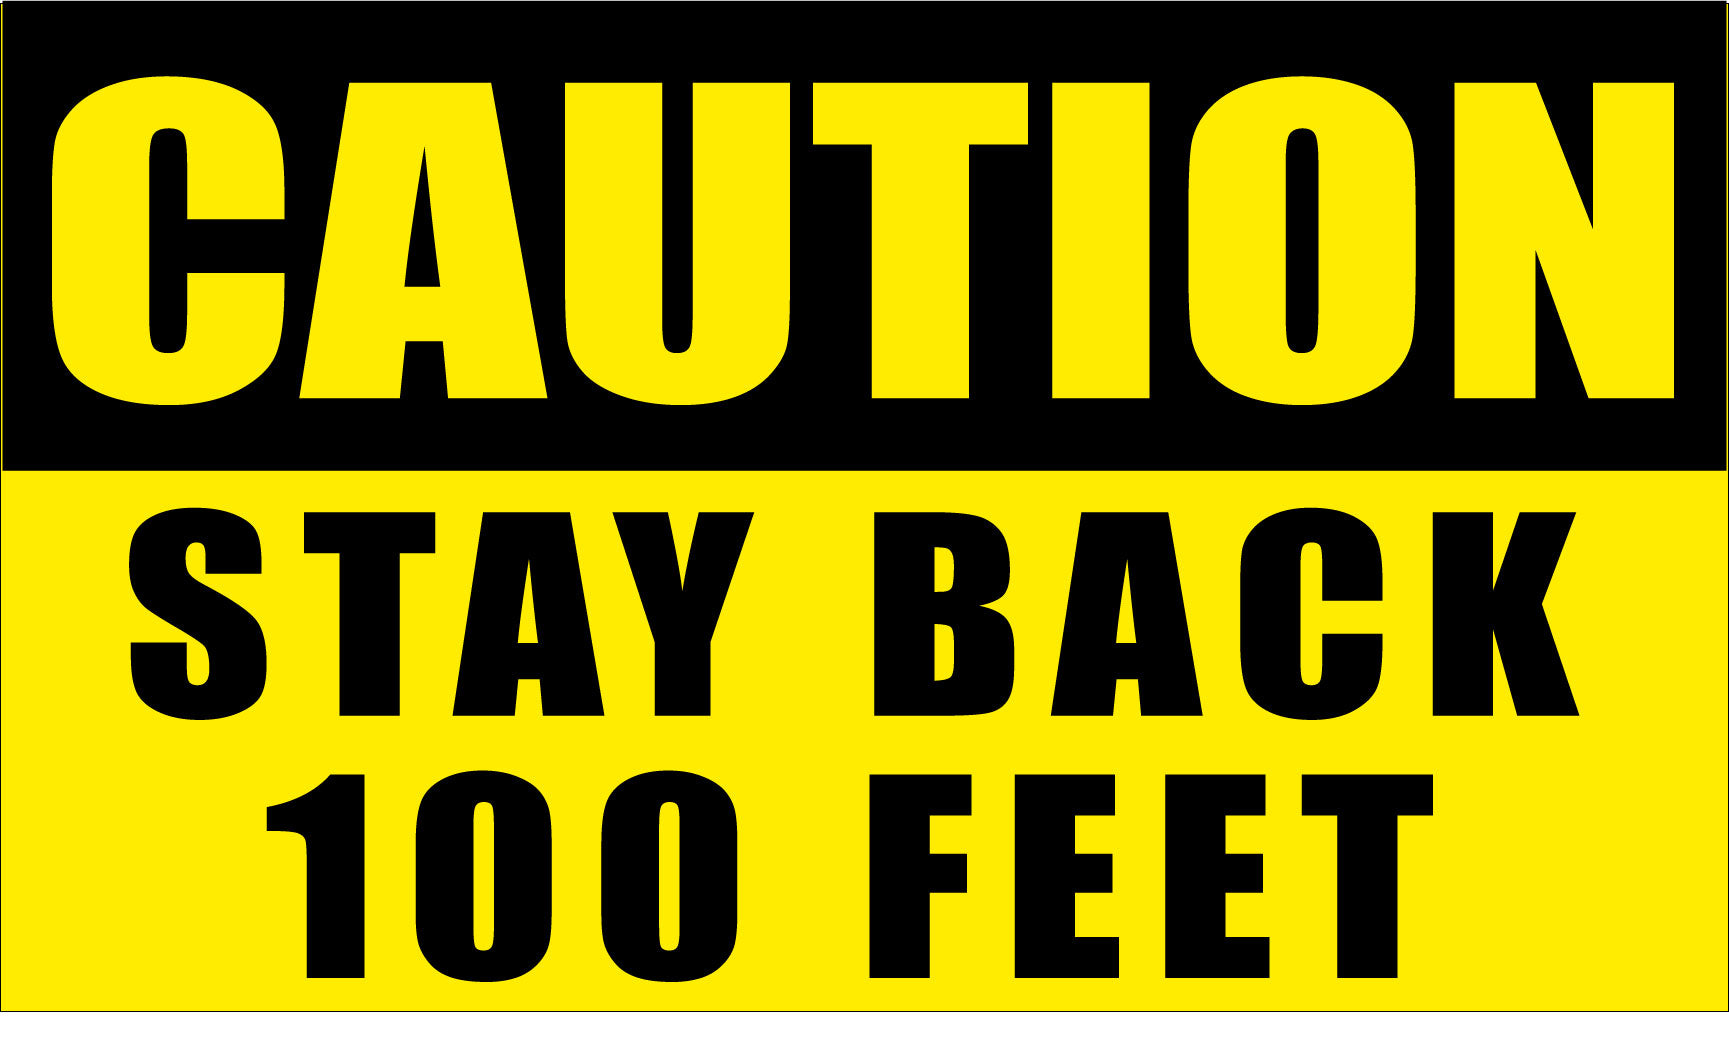 CAUTION STAY BACK 100 FEET TRUCK SAFETY STICKER DECAL 10x14"